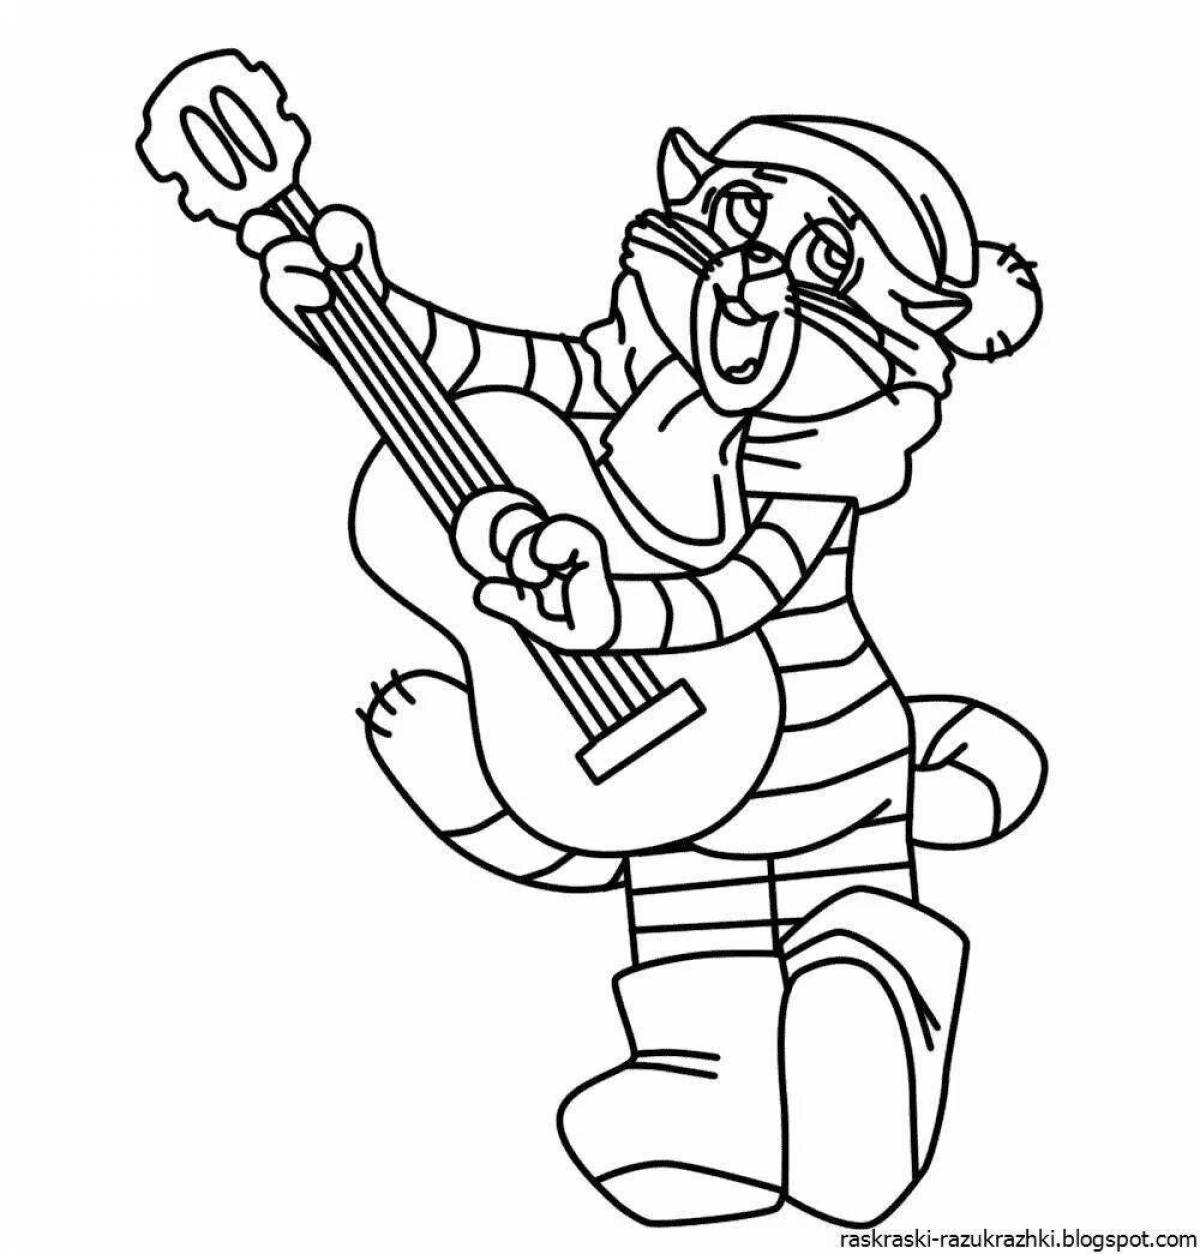 Glitter sailor skin coloring page for toddlers